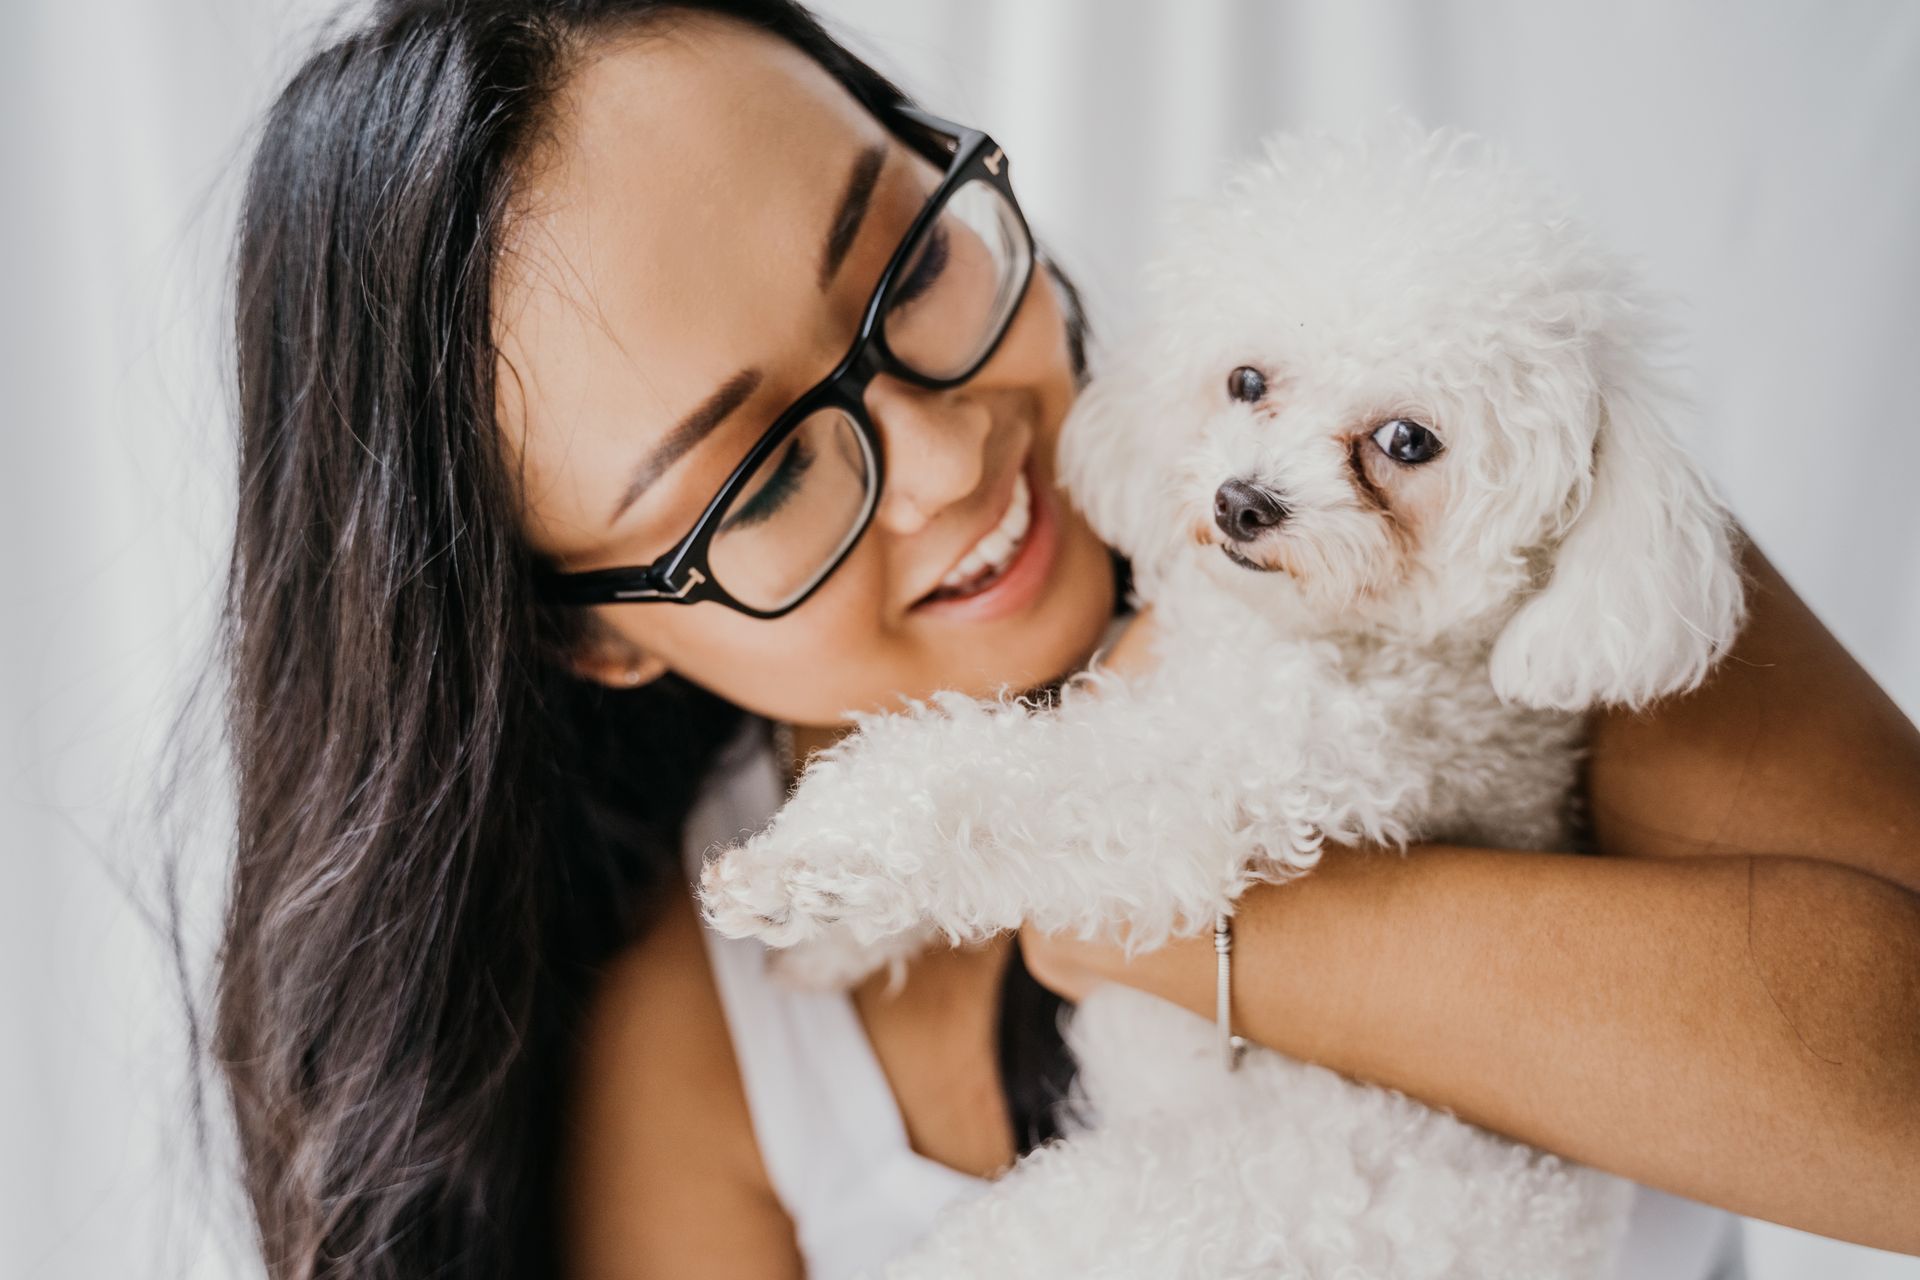 a woman wearing glasses is holding a small white poodle dog .